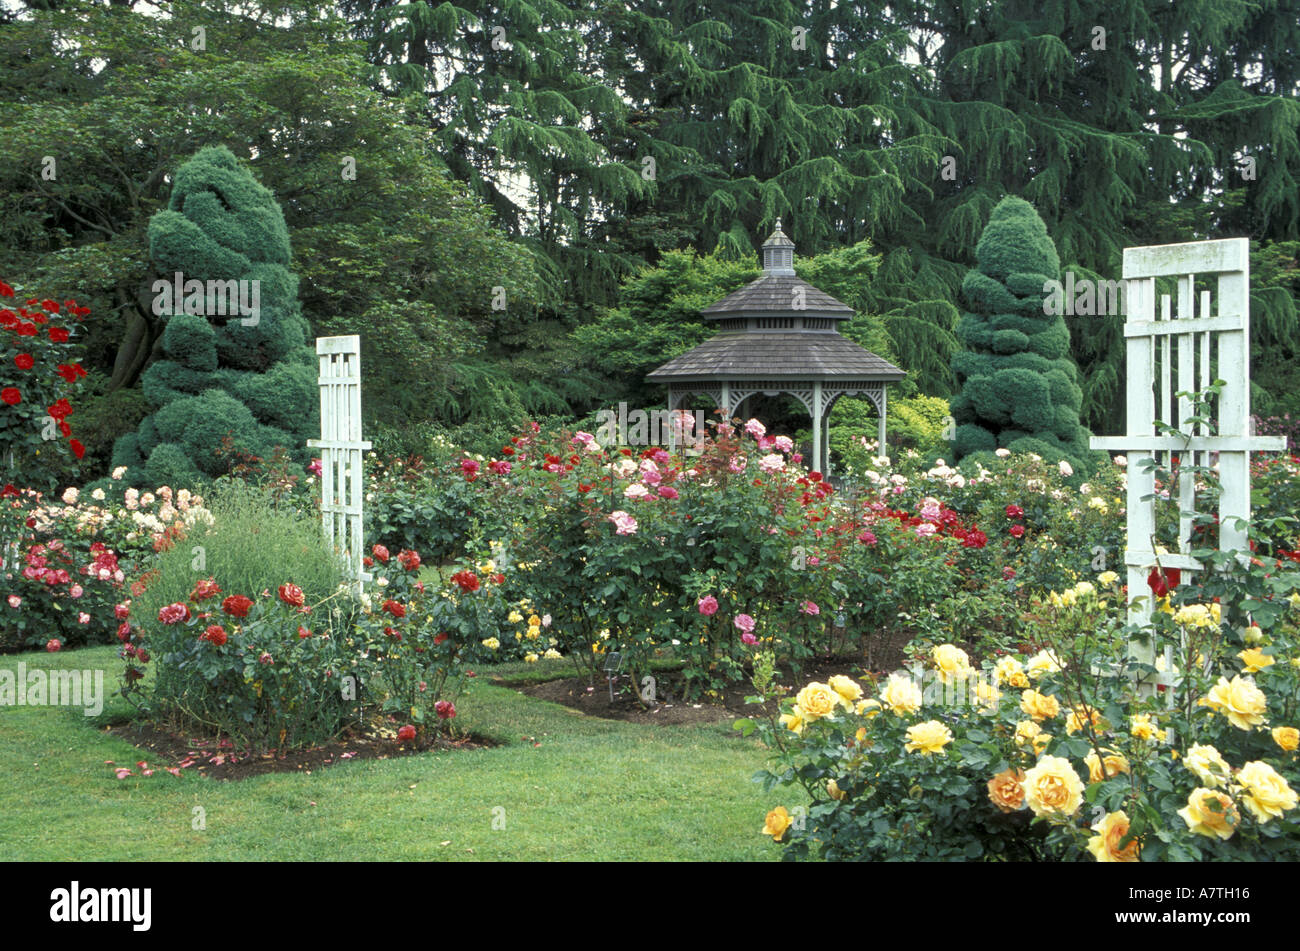 Usa Washington State Seattle Gazebo And Roses In Bloom At The